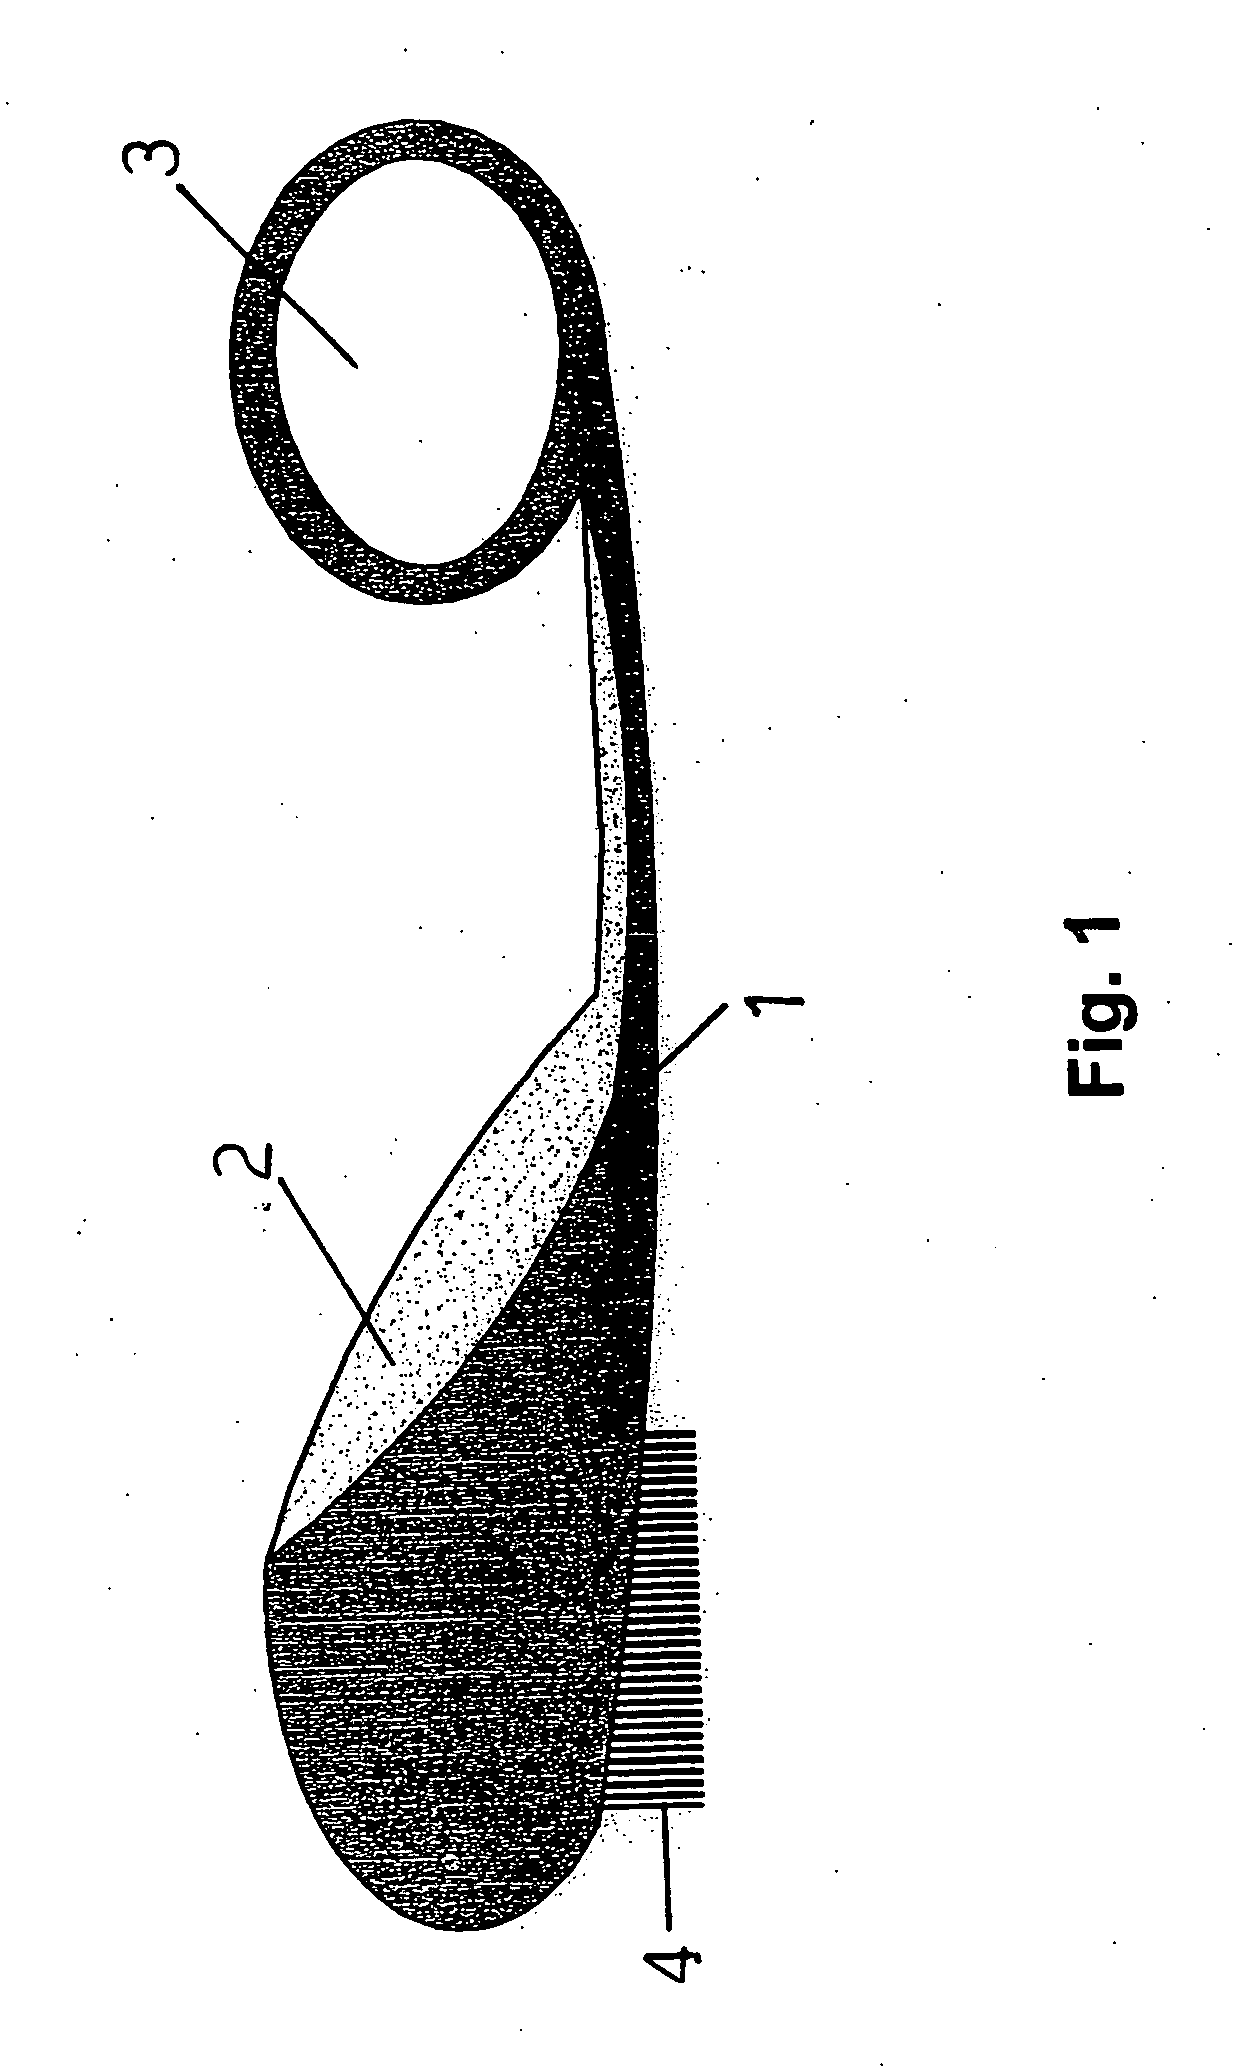 Device allowing careful dental prevention and hygiene